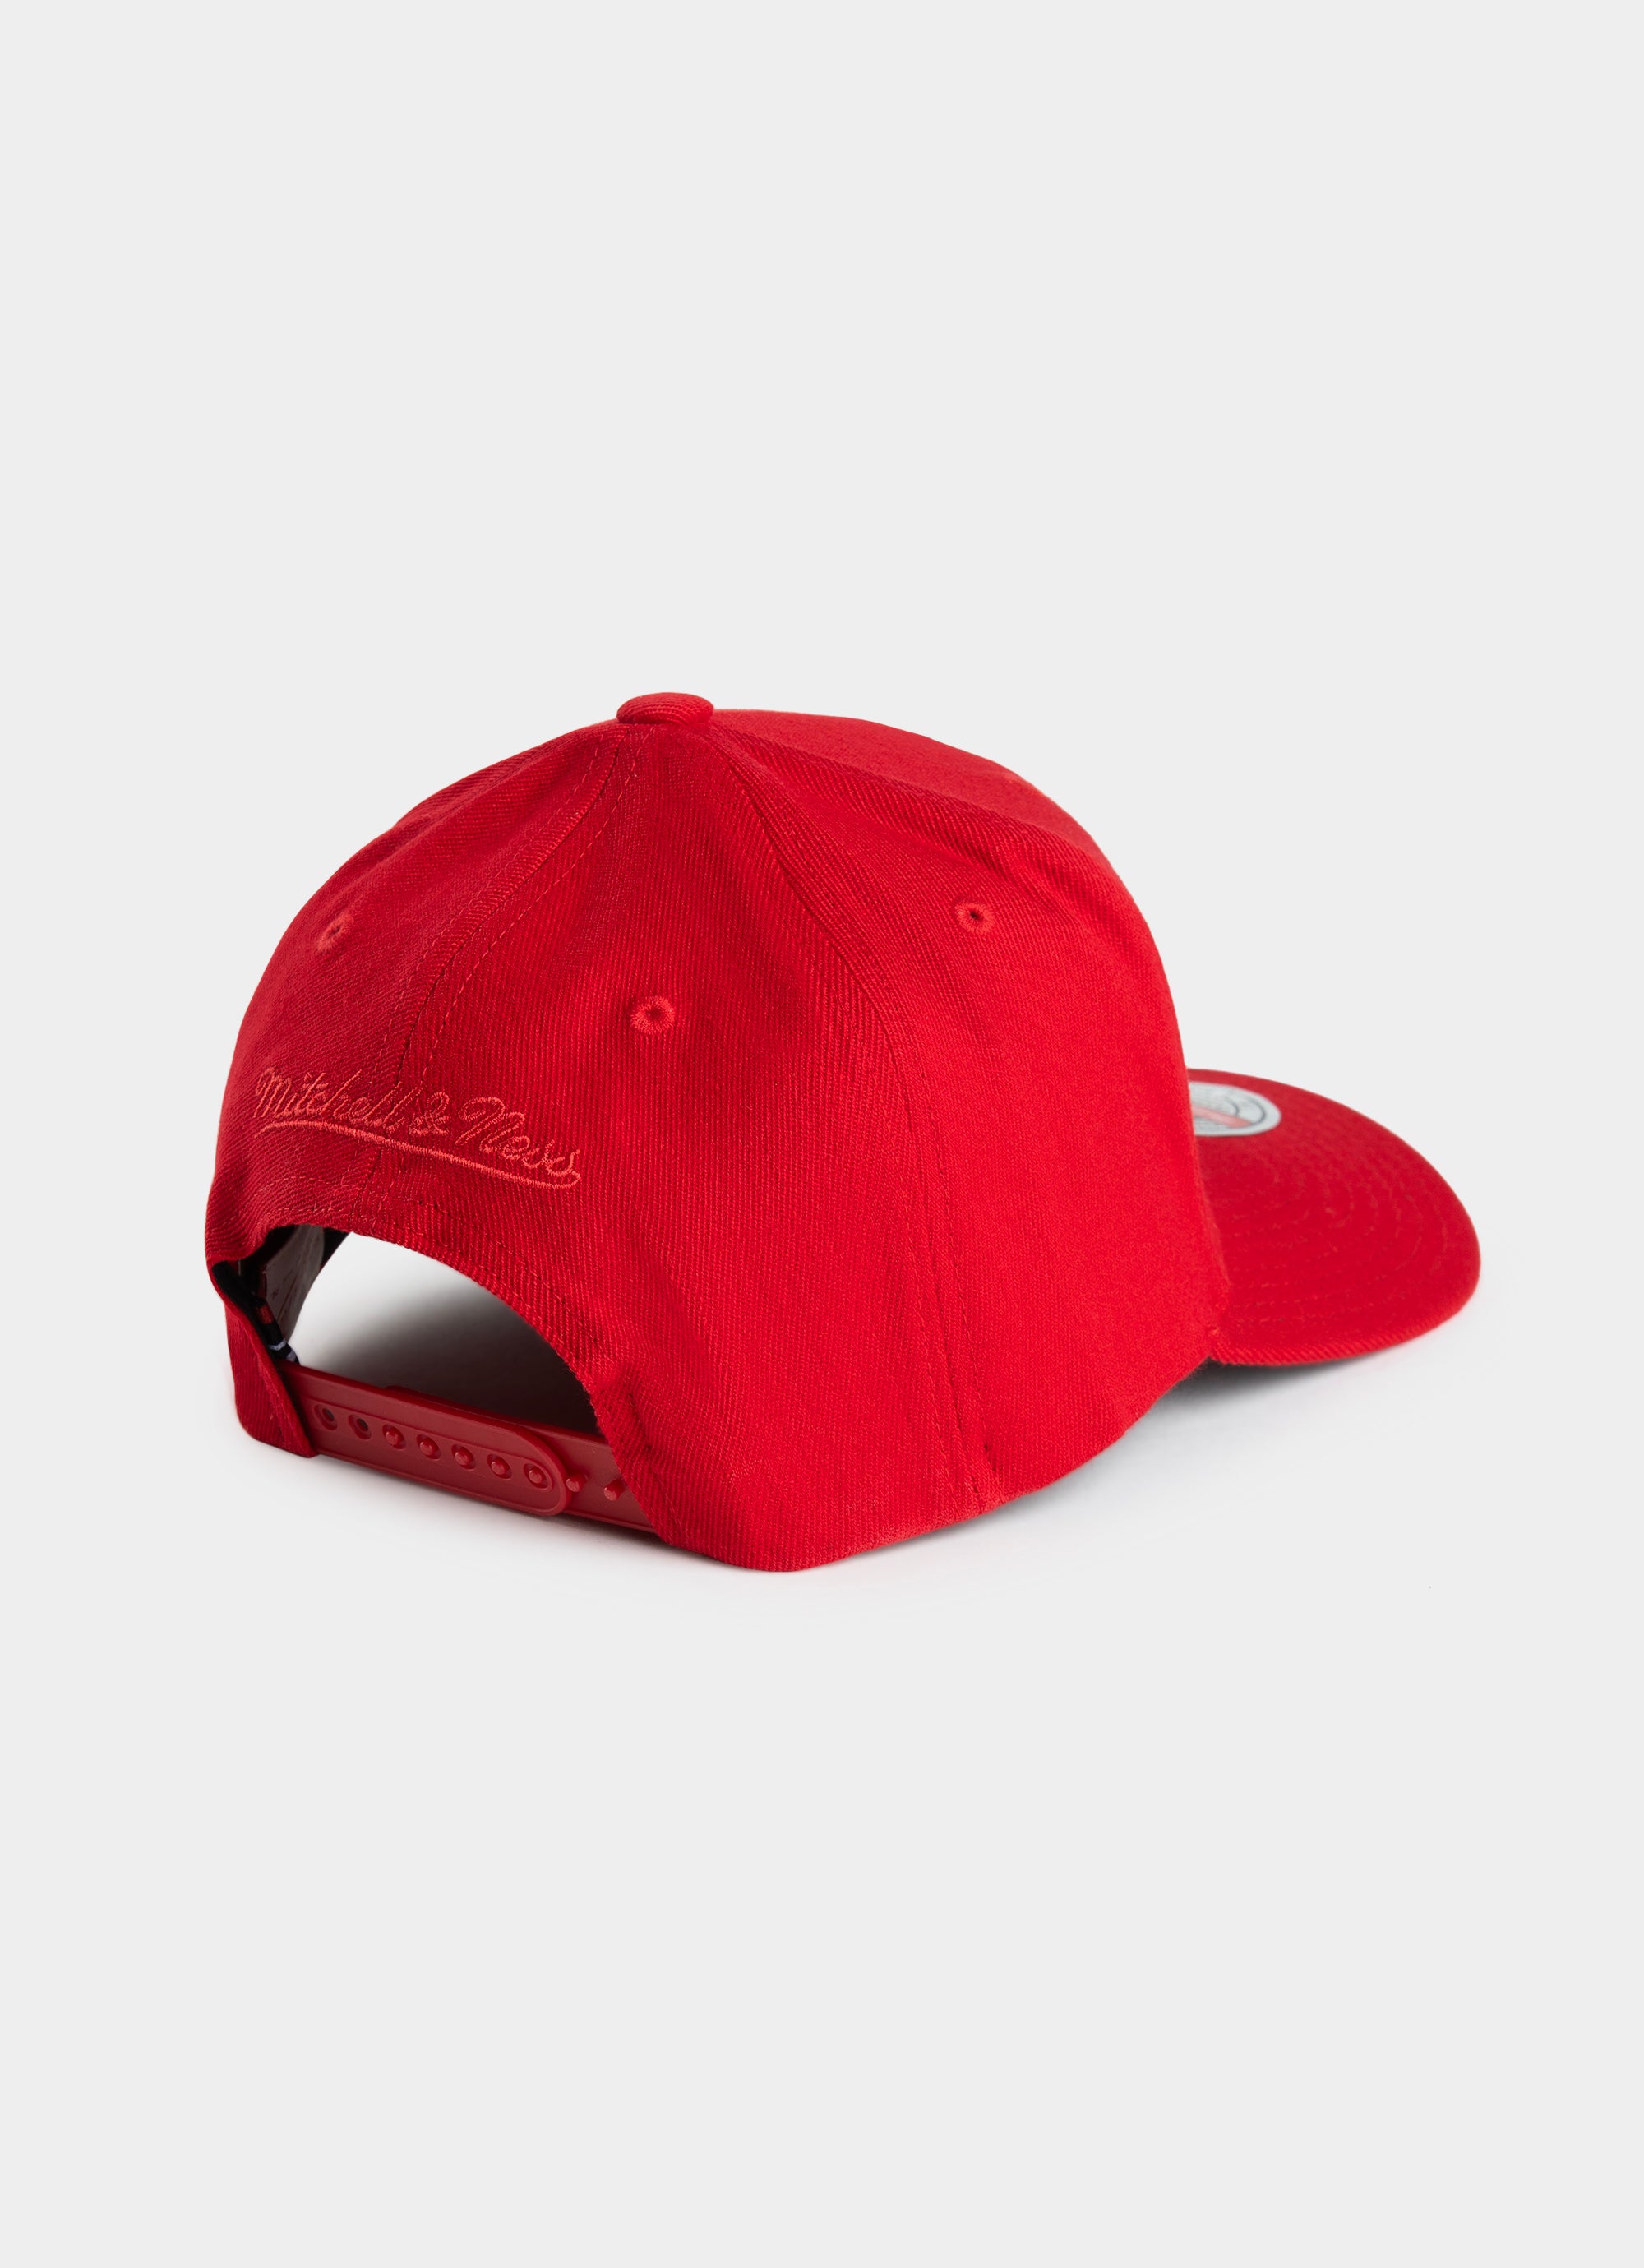 Mitchell & Ness Nba Houston Rockets Classic Snapback Cap in Red